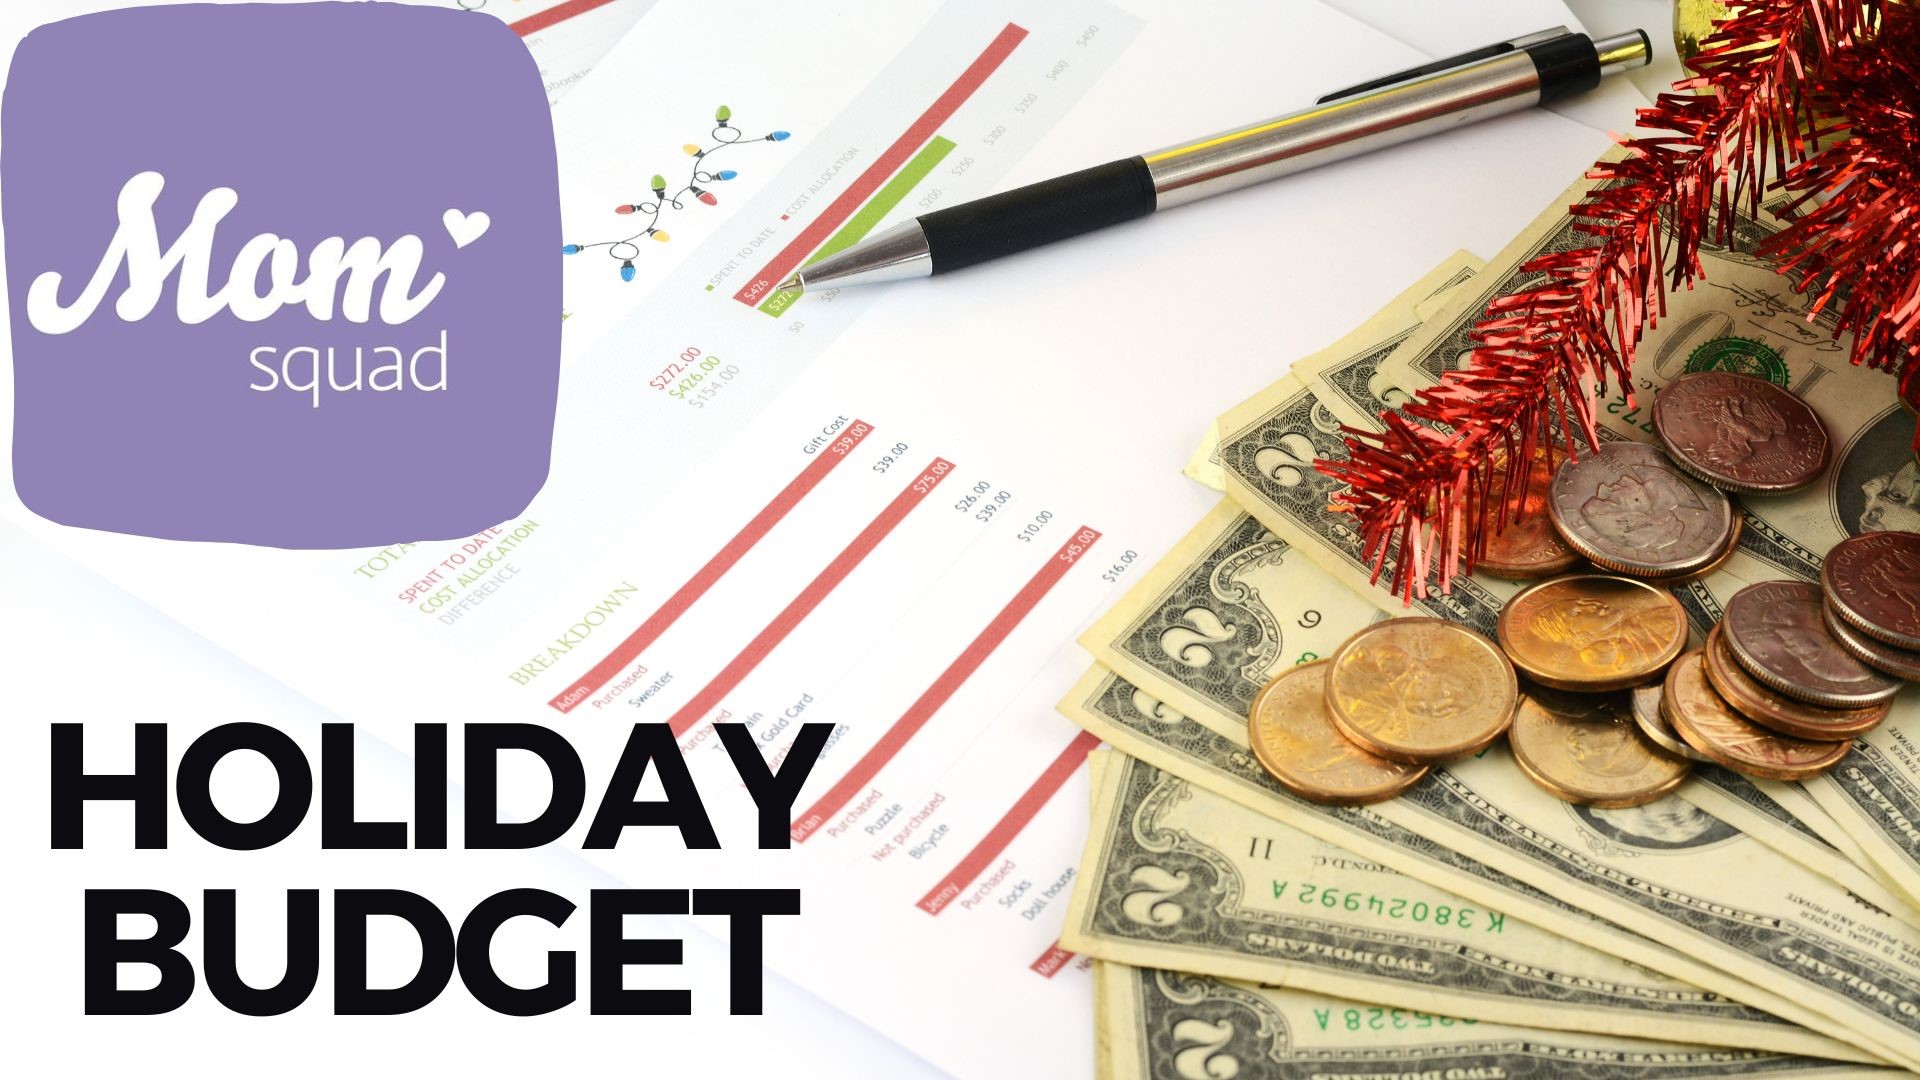 WKYC's Maureen Kyle discusses the holiday budget battle and gives advice for avoiding the emotional expenses. She speaks with a financial advisor for tips.